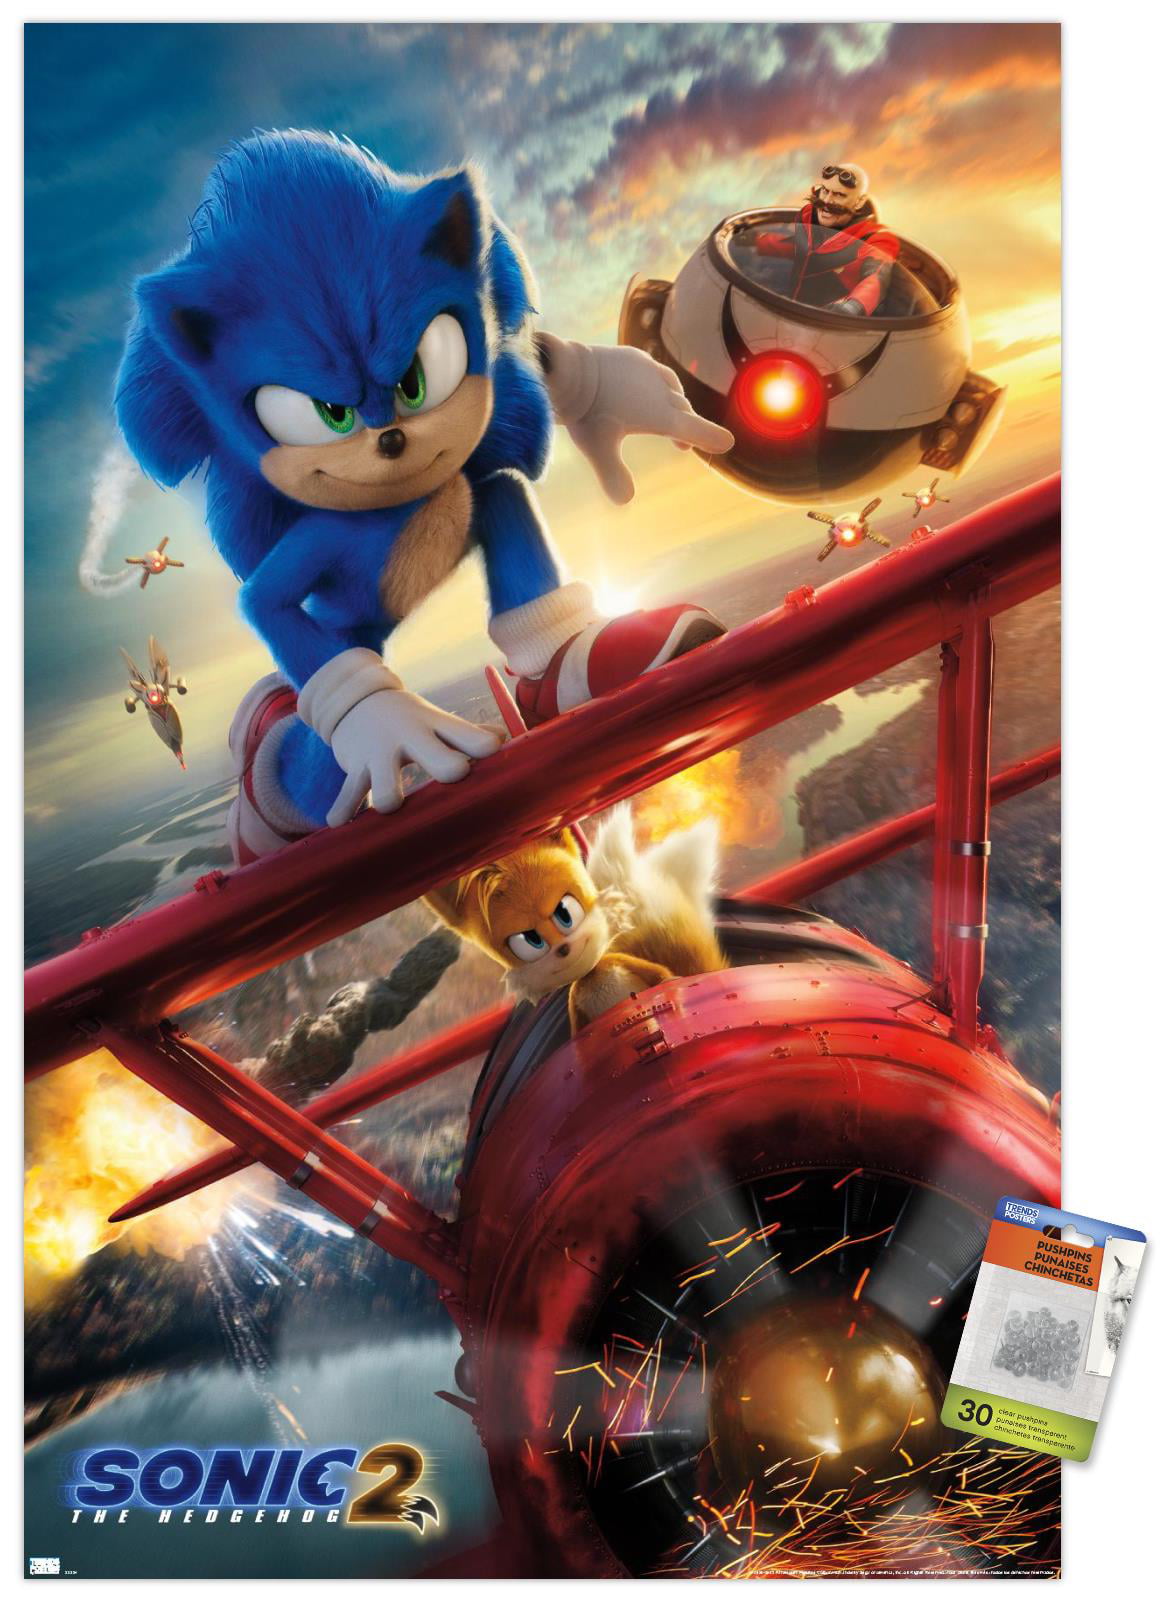 Sonic the Hedgehog 2: The Official Movie Poster Book (Paperback